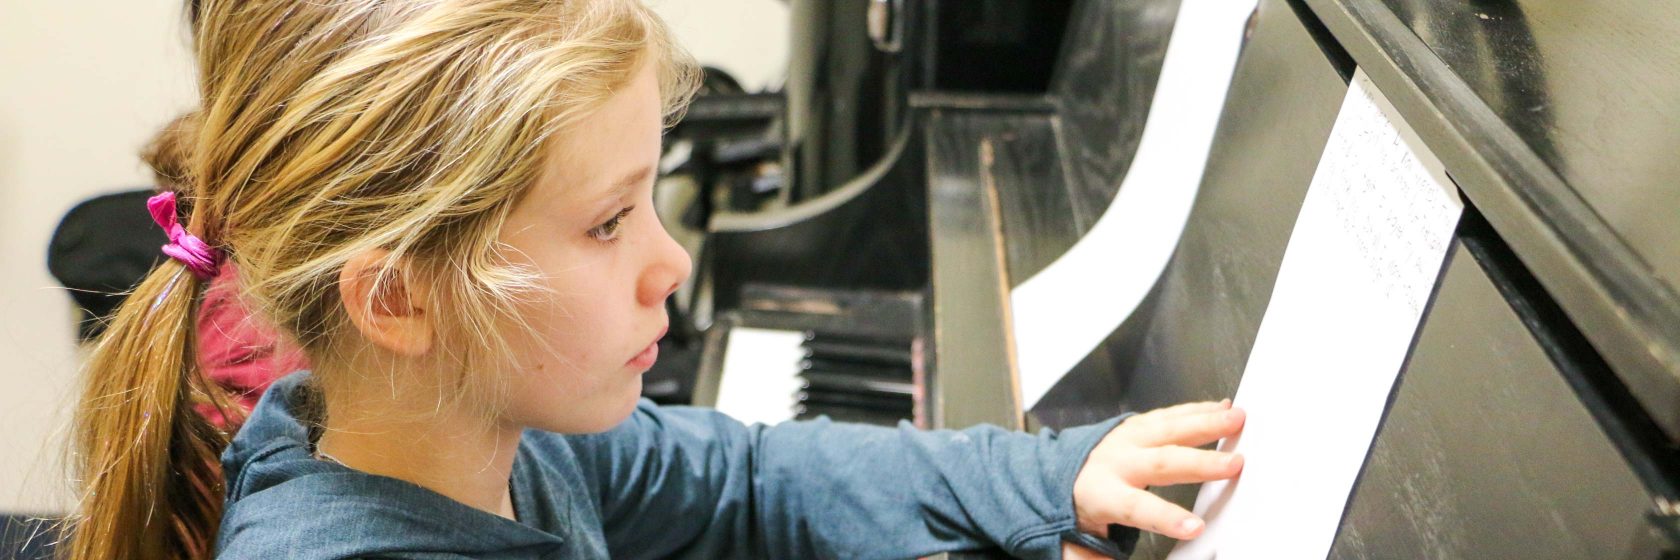 A student working on learning the piano.